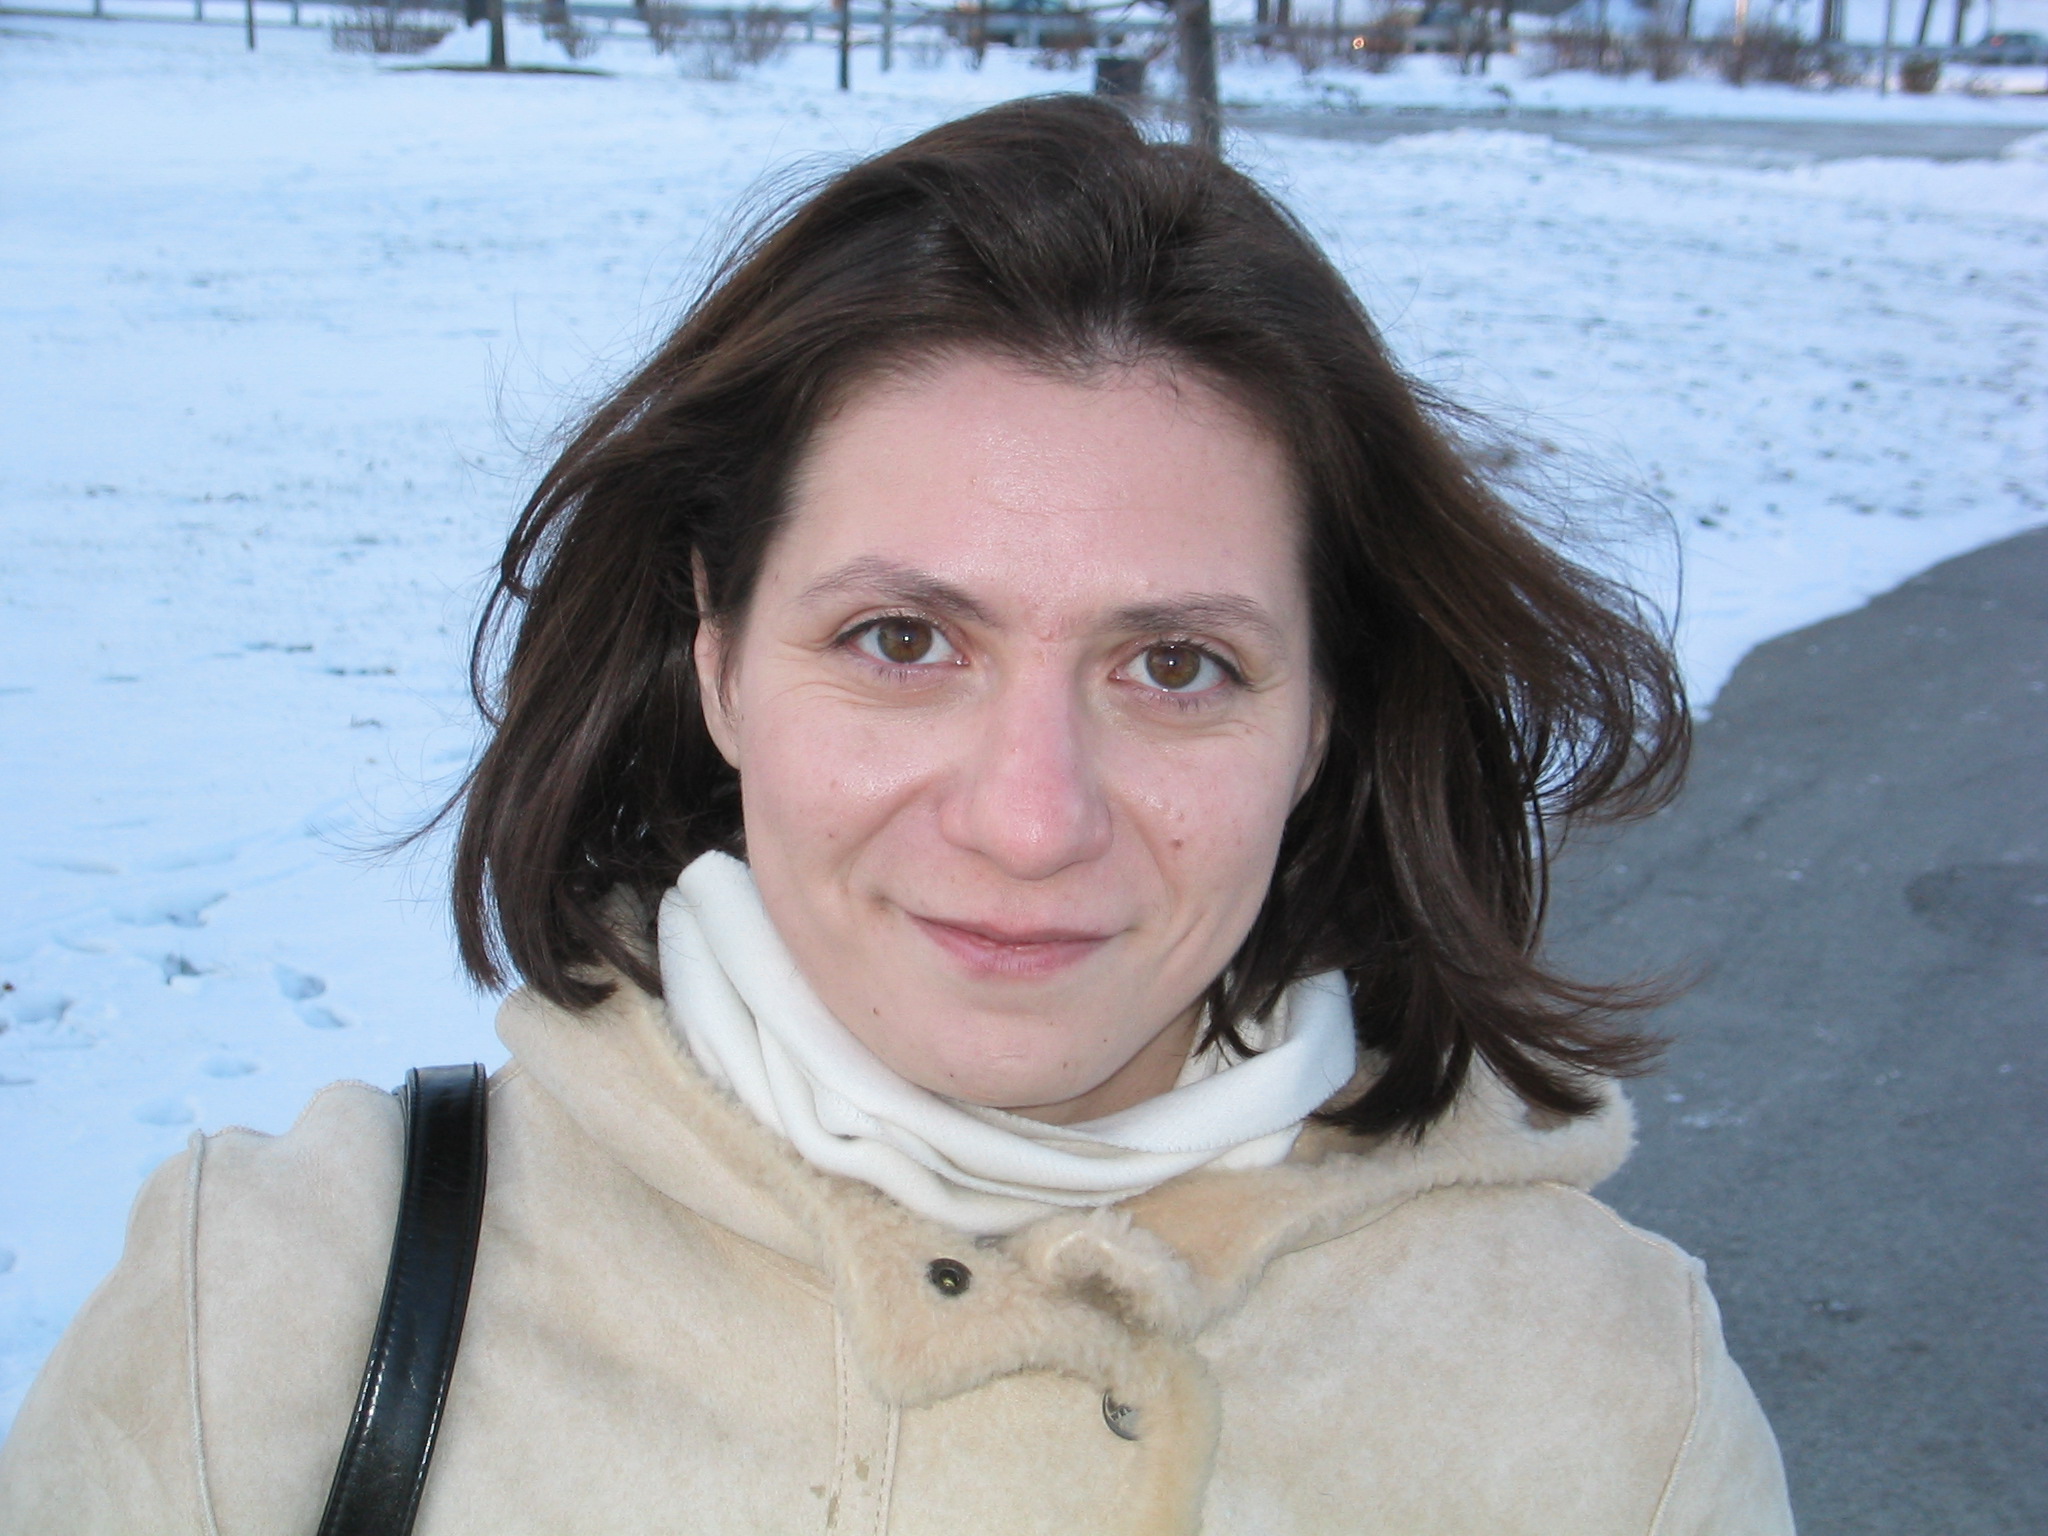 woman with large hair posing on snow covered field